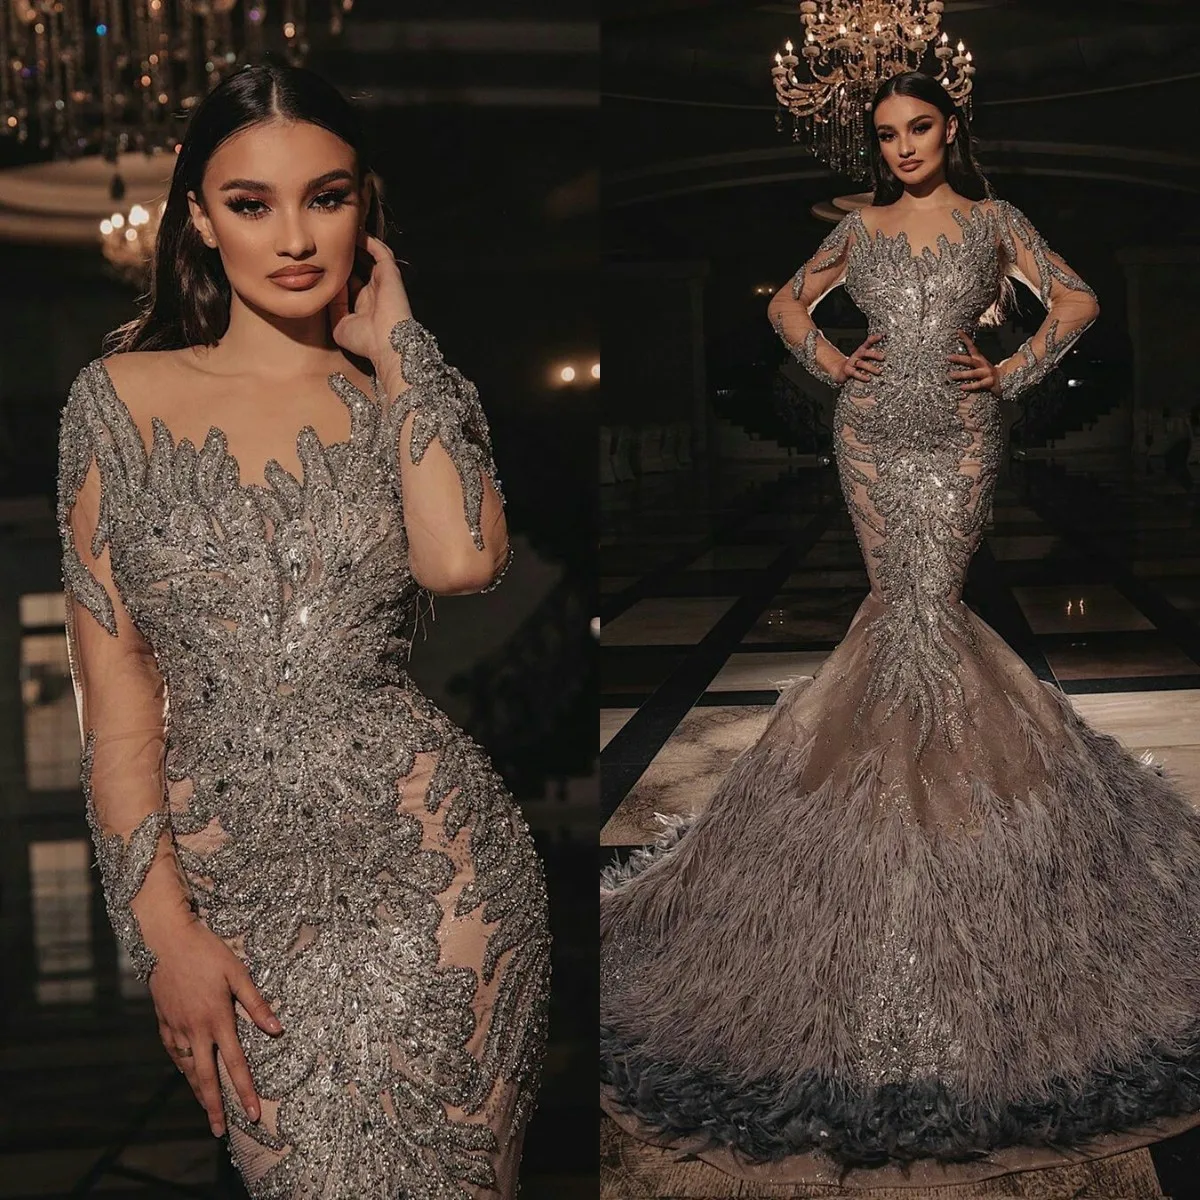 

Customize Mermaid Evening Dress See Thru Lace Sequined Women's Luxury Prom Gowns Feathers Train Elegant Formal Party Dresses